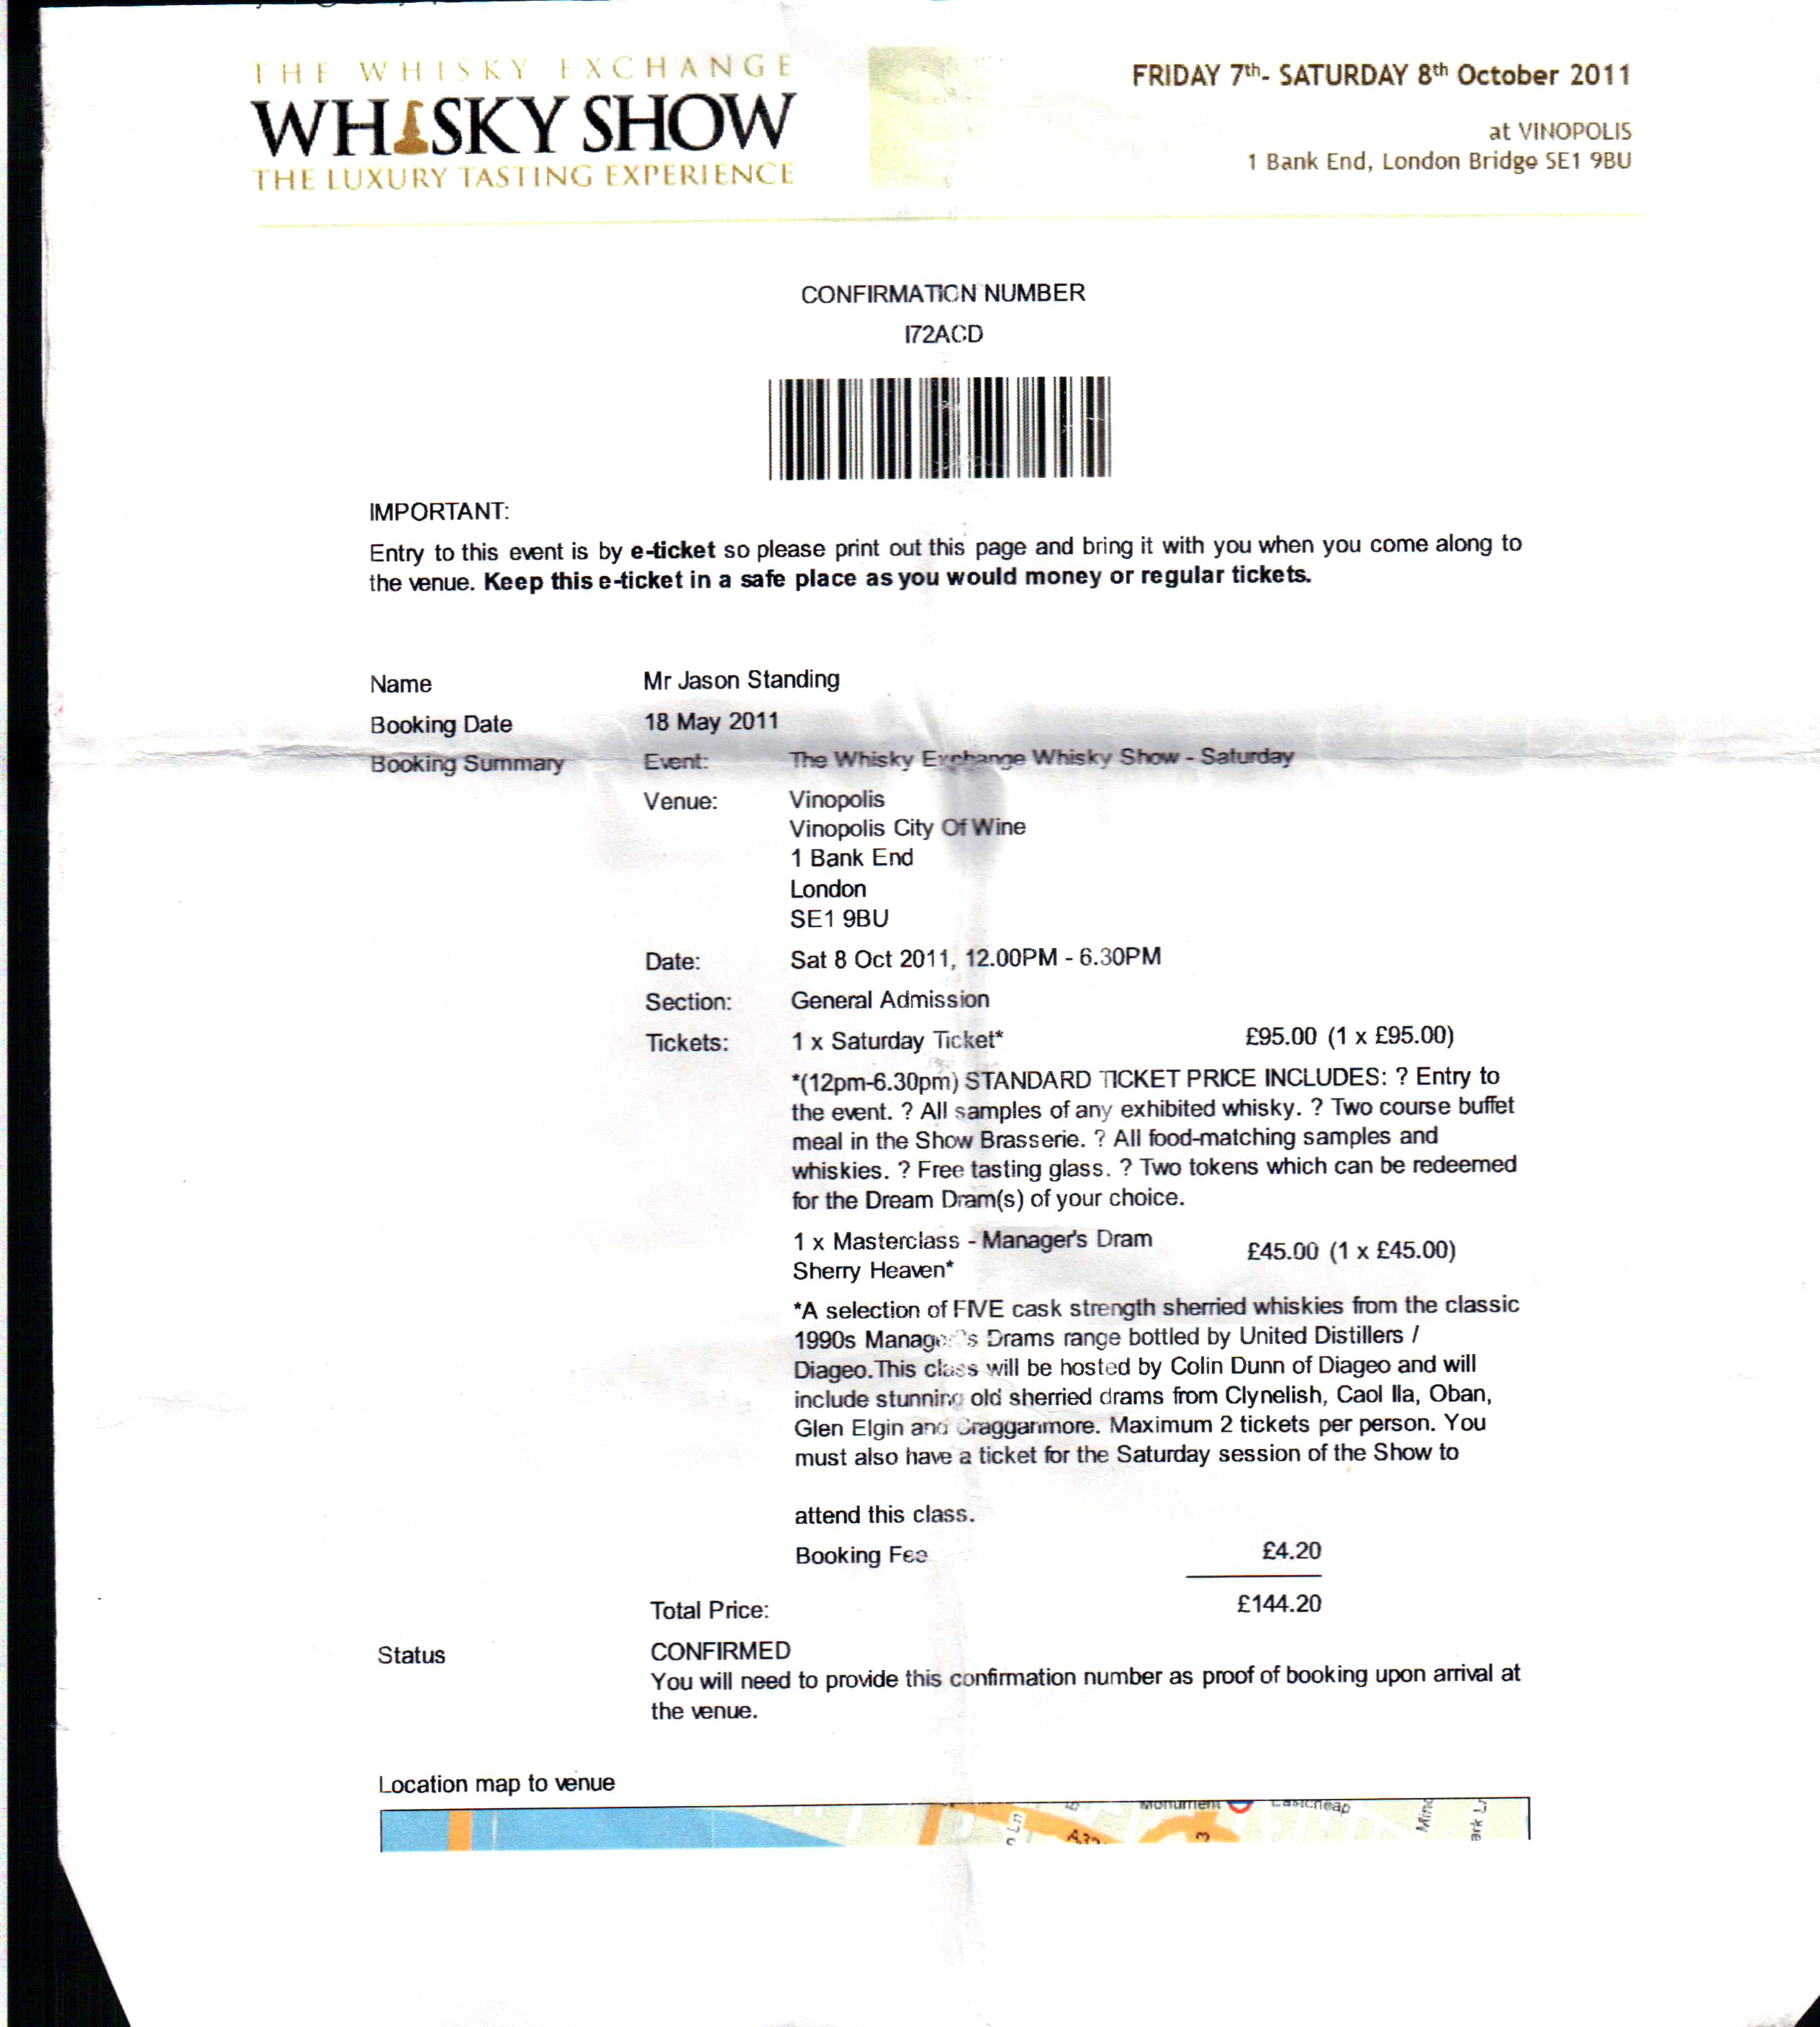 The Whisky Show 2011